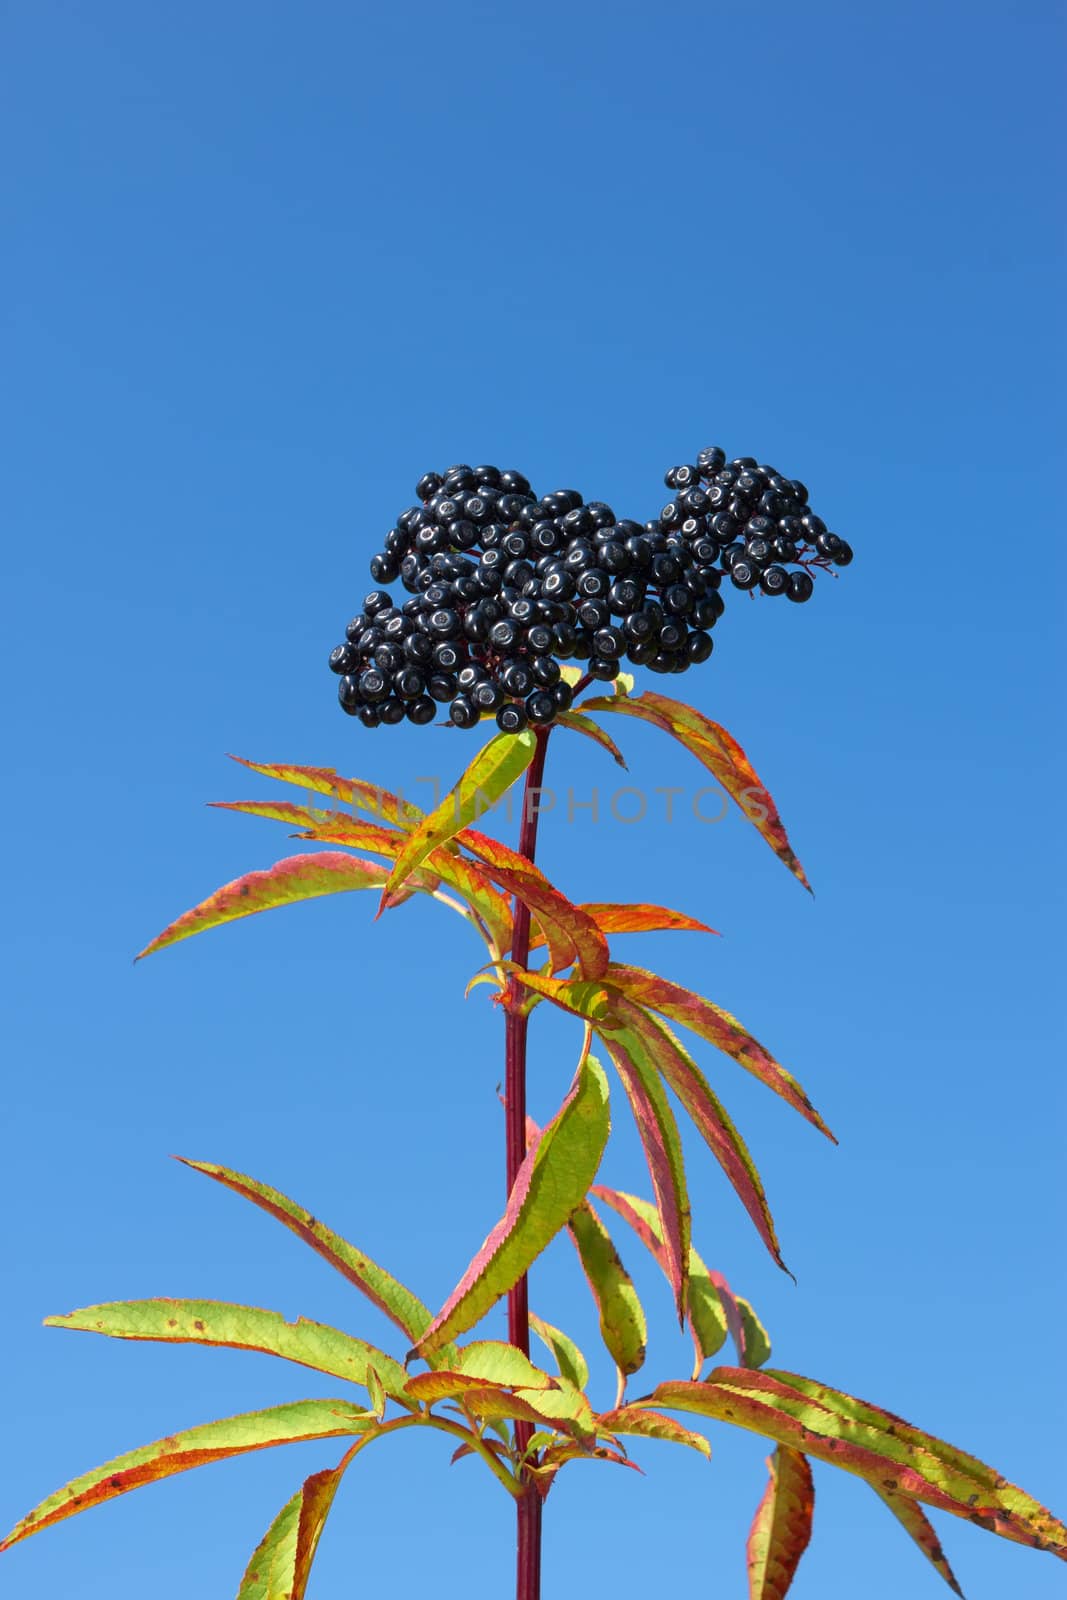 One-year herbaceous elder top with ripe berries against a blue sky. Perennial herb with creeping rhizome. Latin name: Sambucus ebulus, family: Caprifoliaceae